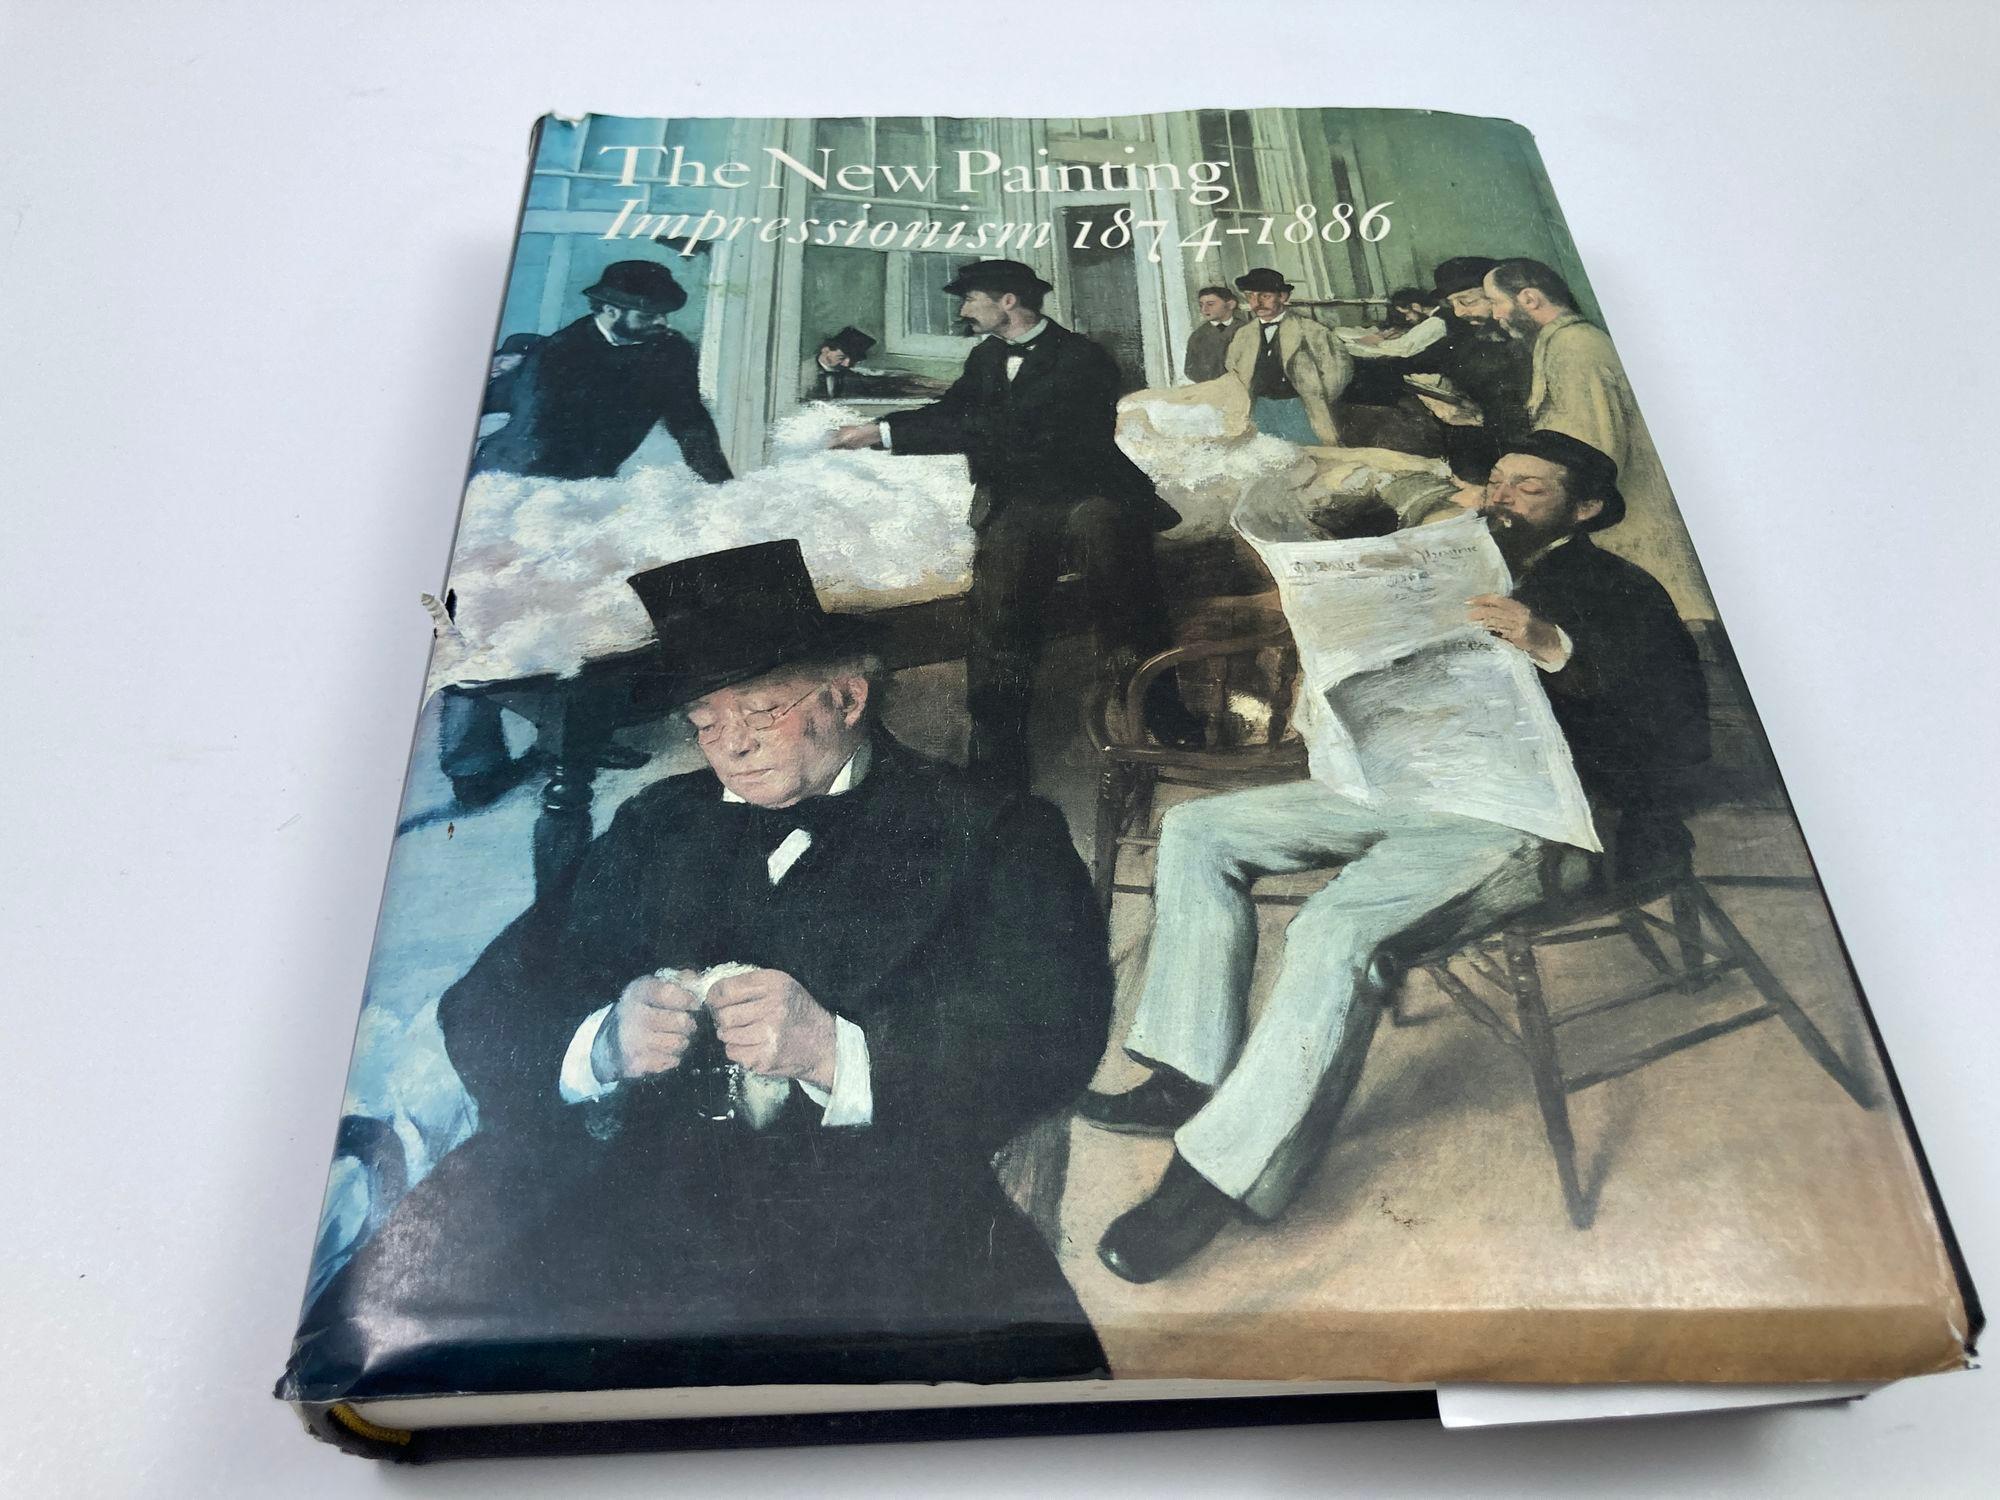 The New Painting; Impressionism 1874-1886. by Moffett, Charles S.Published by The Fine Arts Museums of San Francisco, 1986.Hardcover coffee table book.204 illustrations in full color. 142 B/W illustrations. 507p. Covers 8 landmark Impressionist